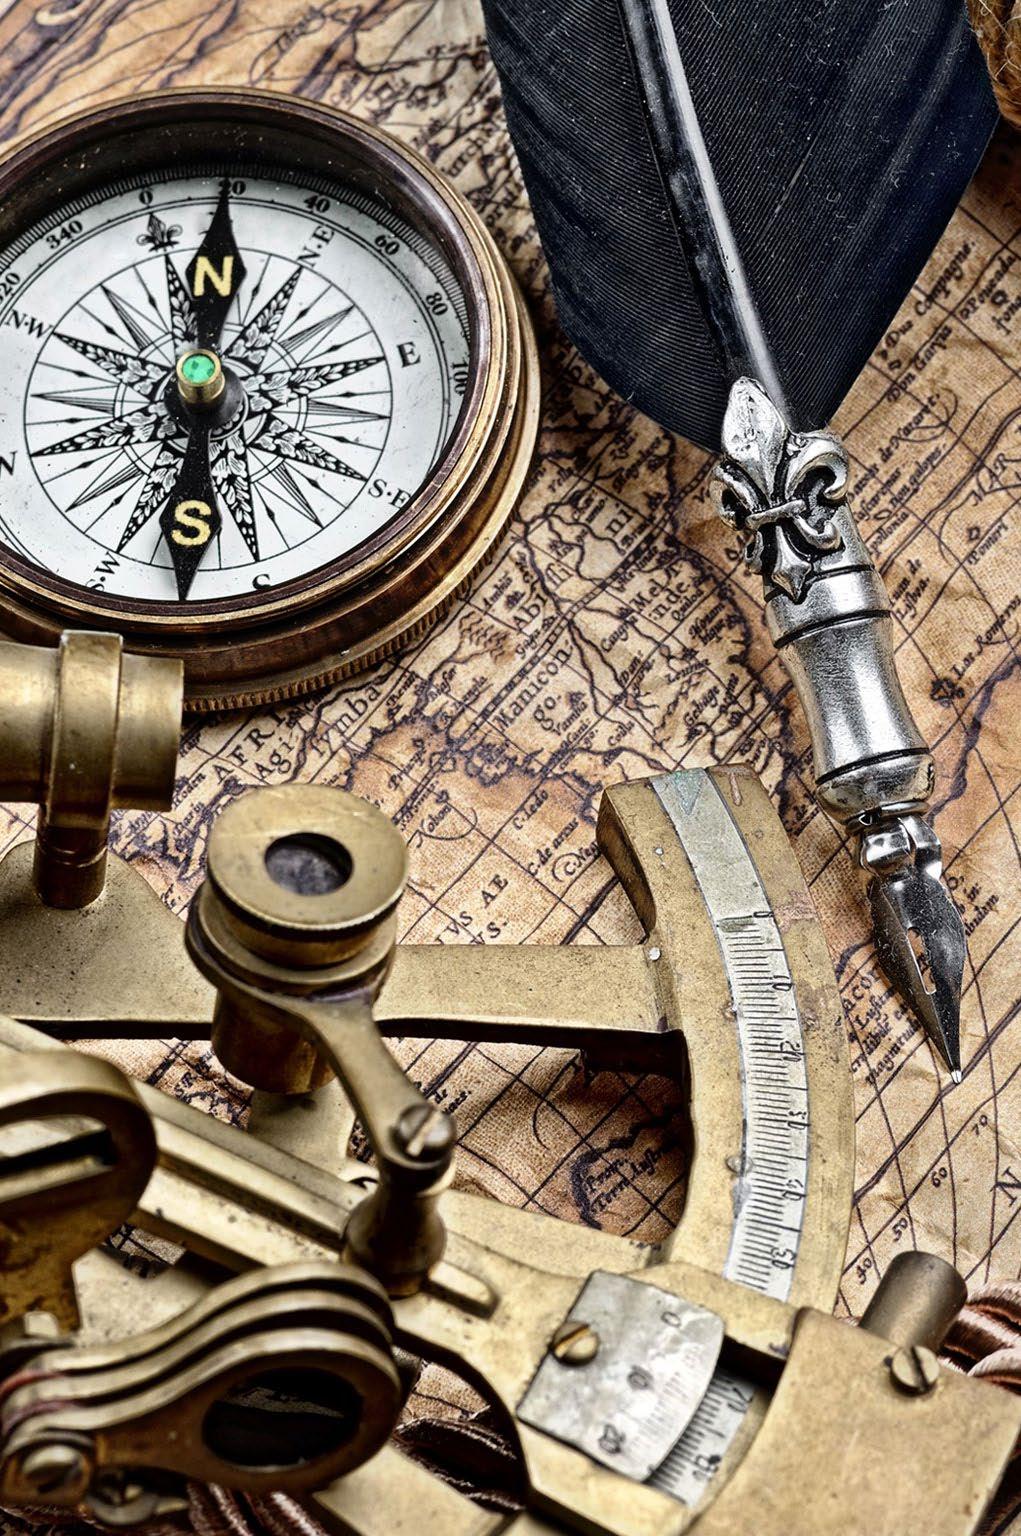 THE VOYAGE PLAN For centuries, sailors have embarked on their journeys by checking the compass to make sure they start in the right direction.